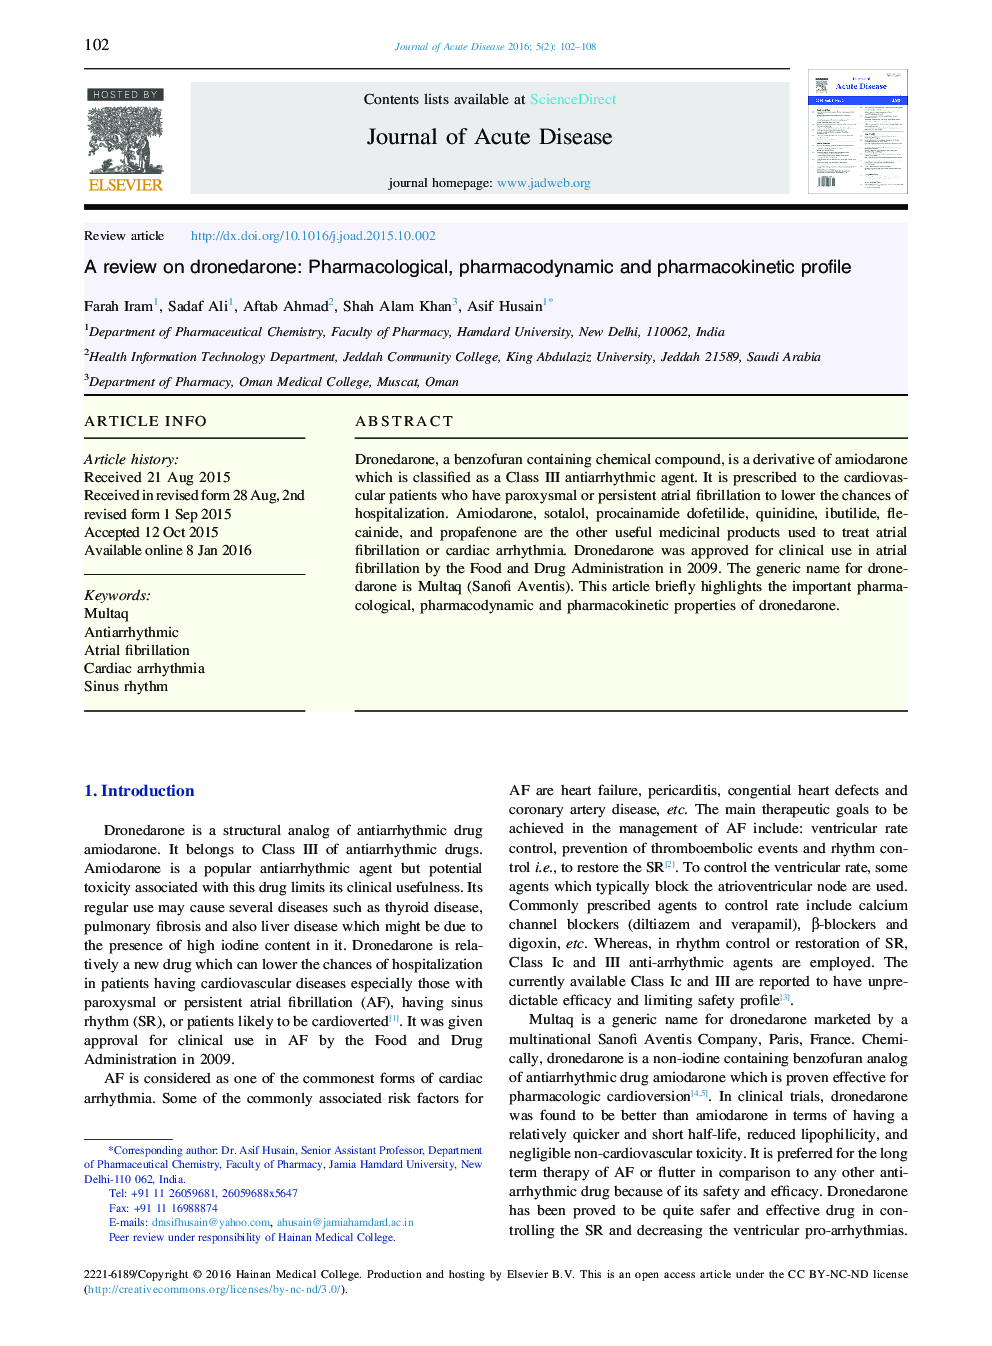 A review on dronedarone: Pharmacological, pharmacodynamic and pharmacokinetic profile 